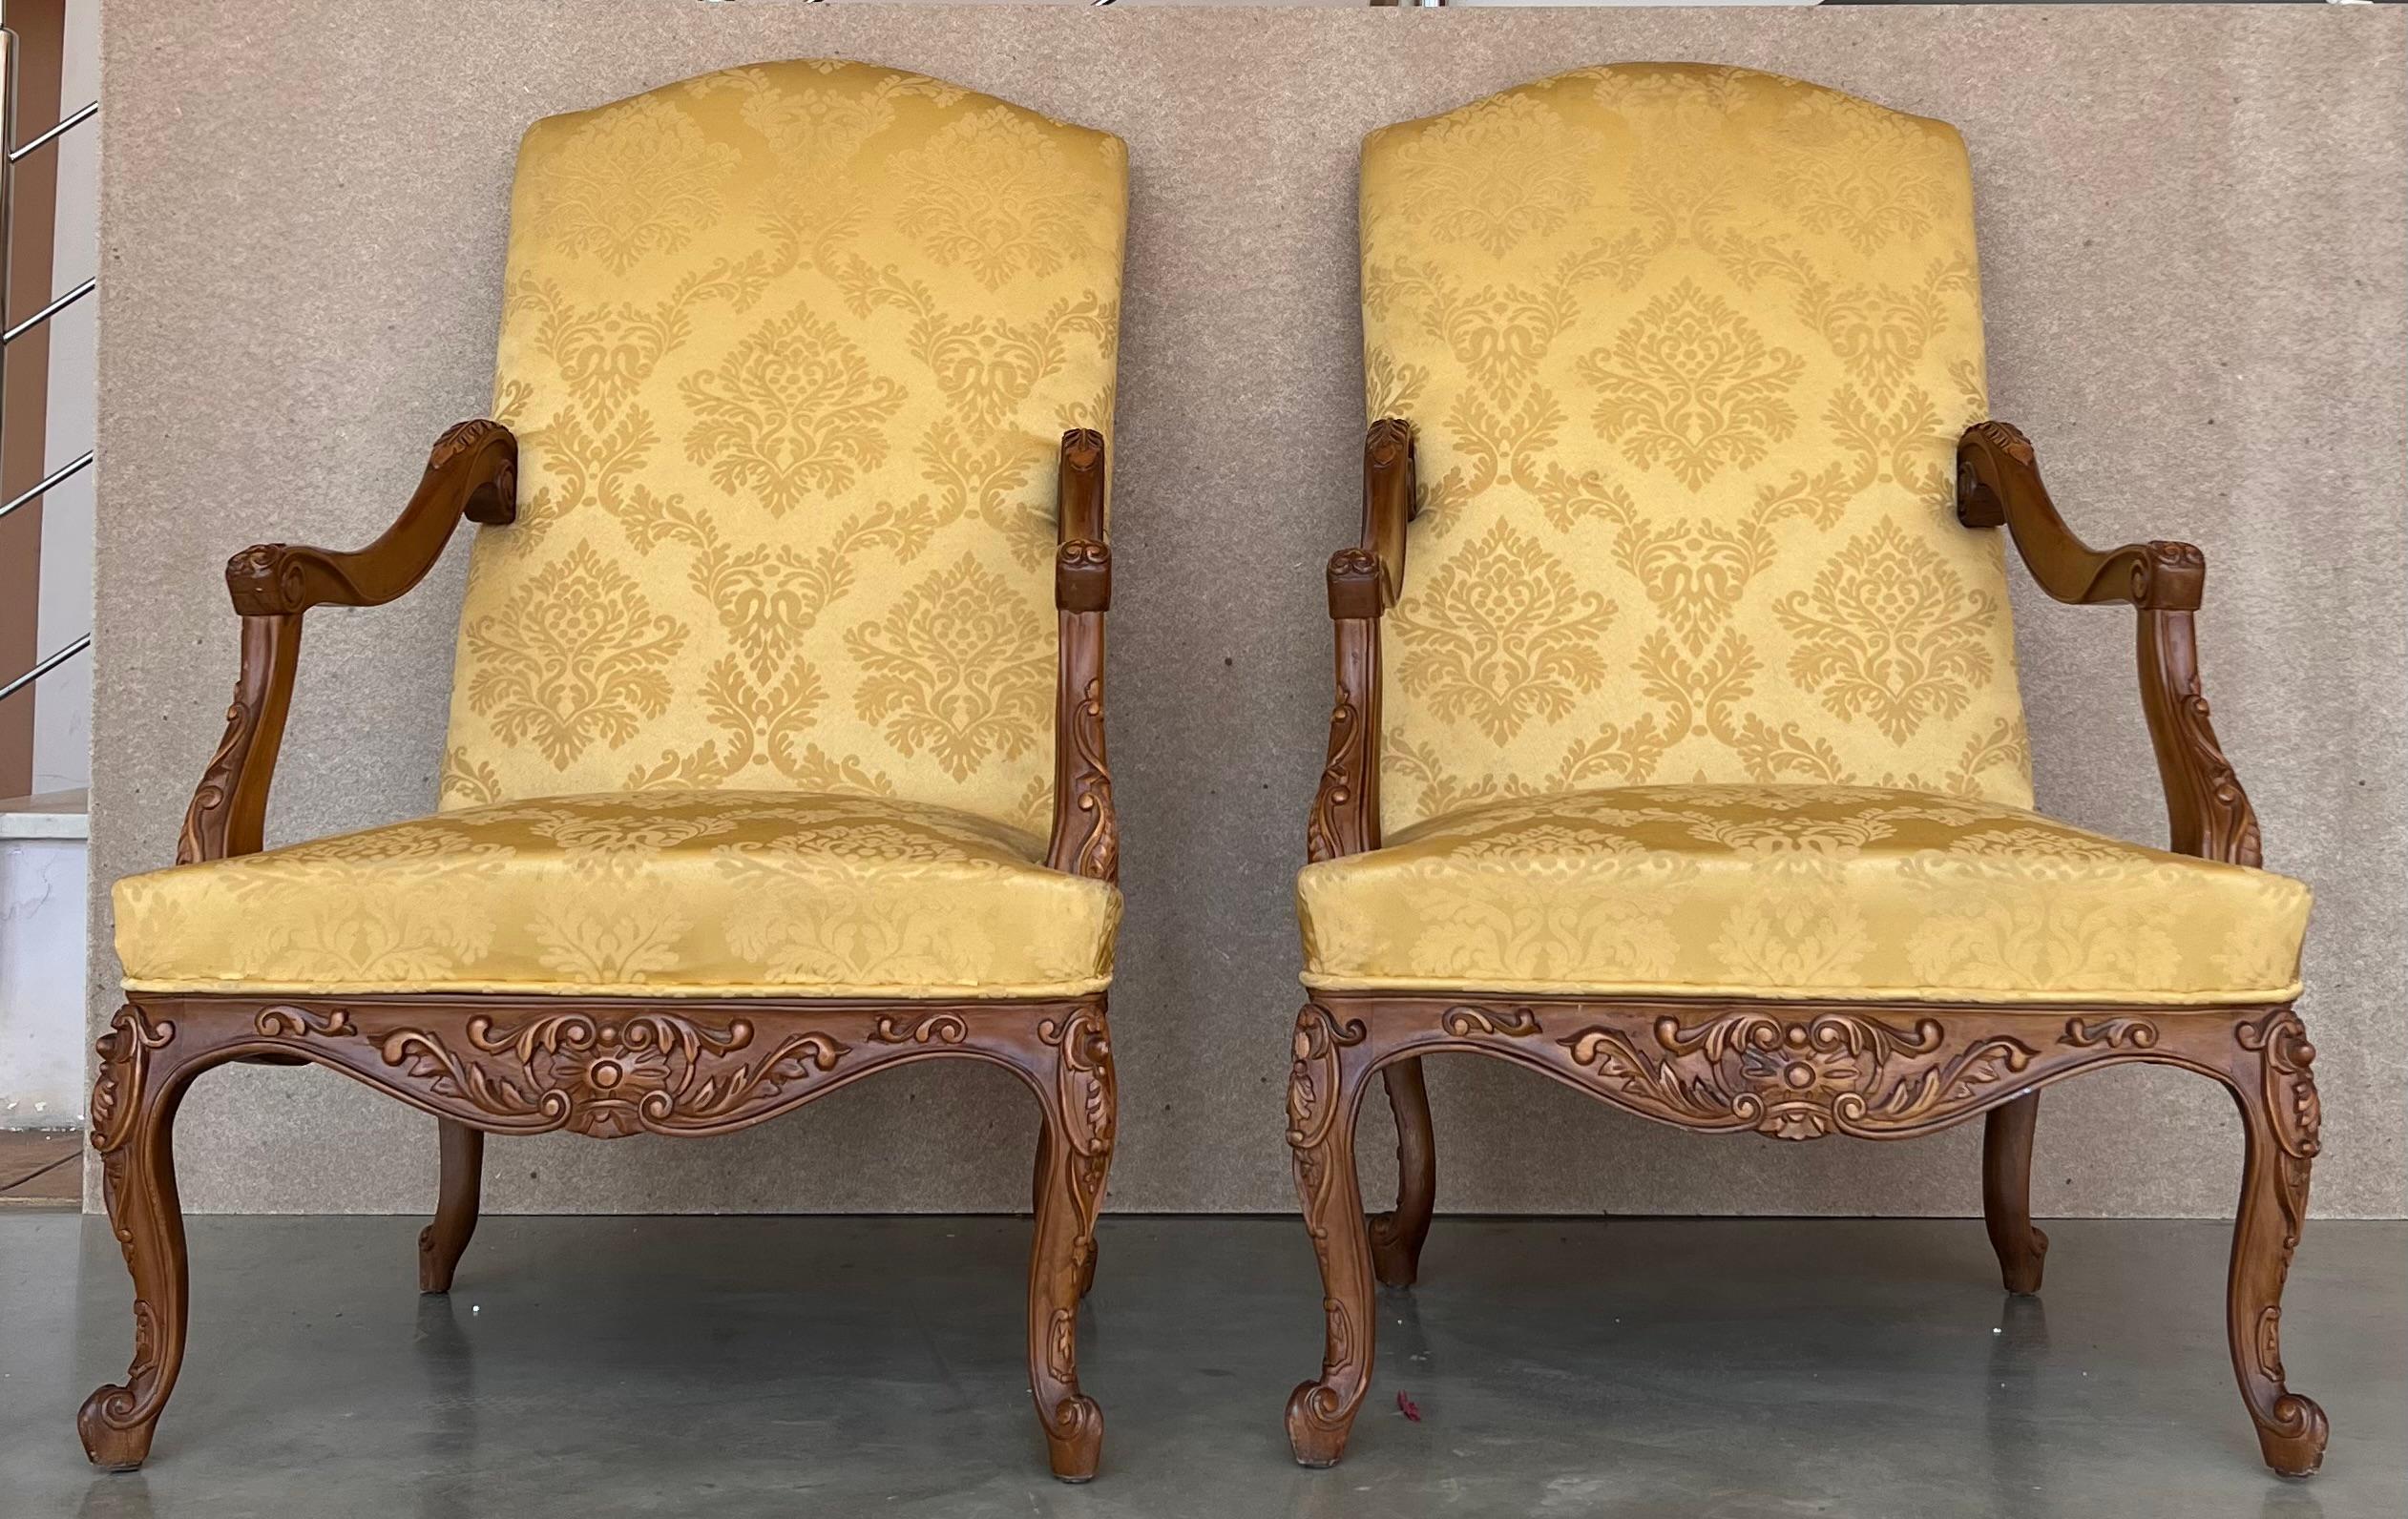 Louis XVI style pair of carved armchairs, Spain, 1900s.
Good antique condition with some minor marks from used and age.


Measure: height to the arm: 25.6 in.